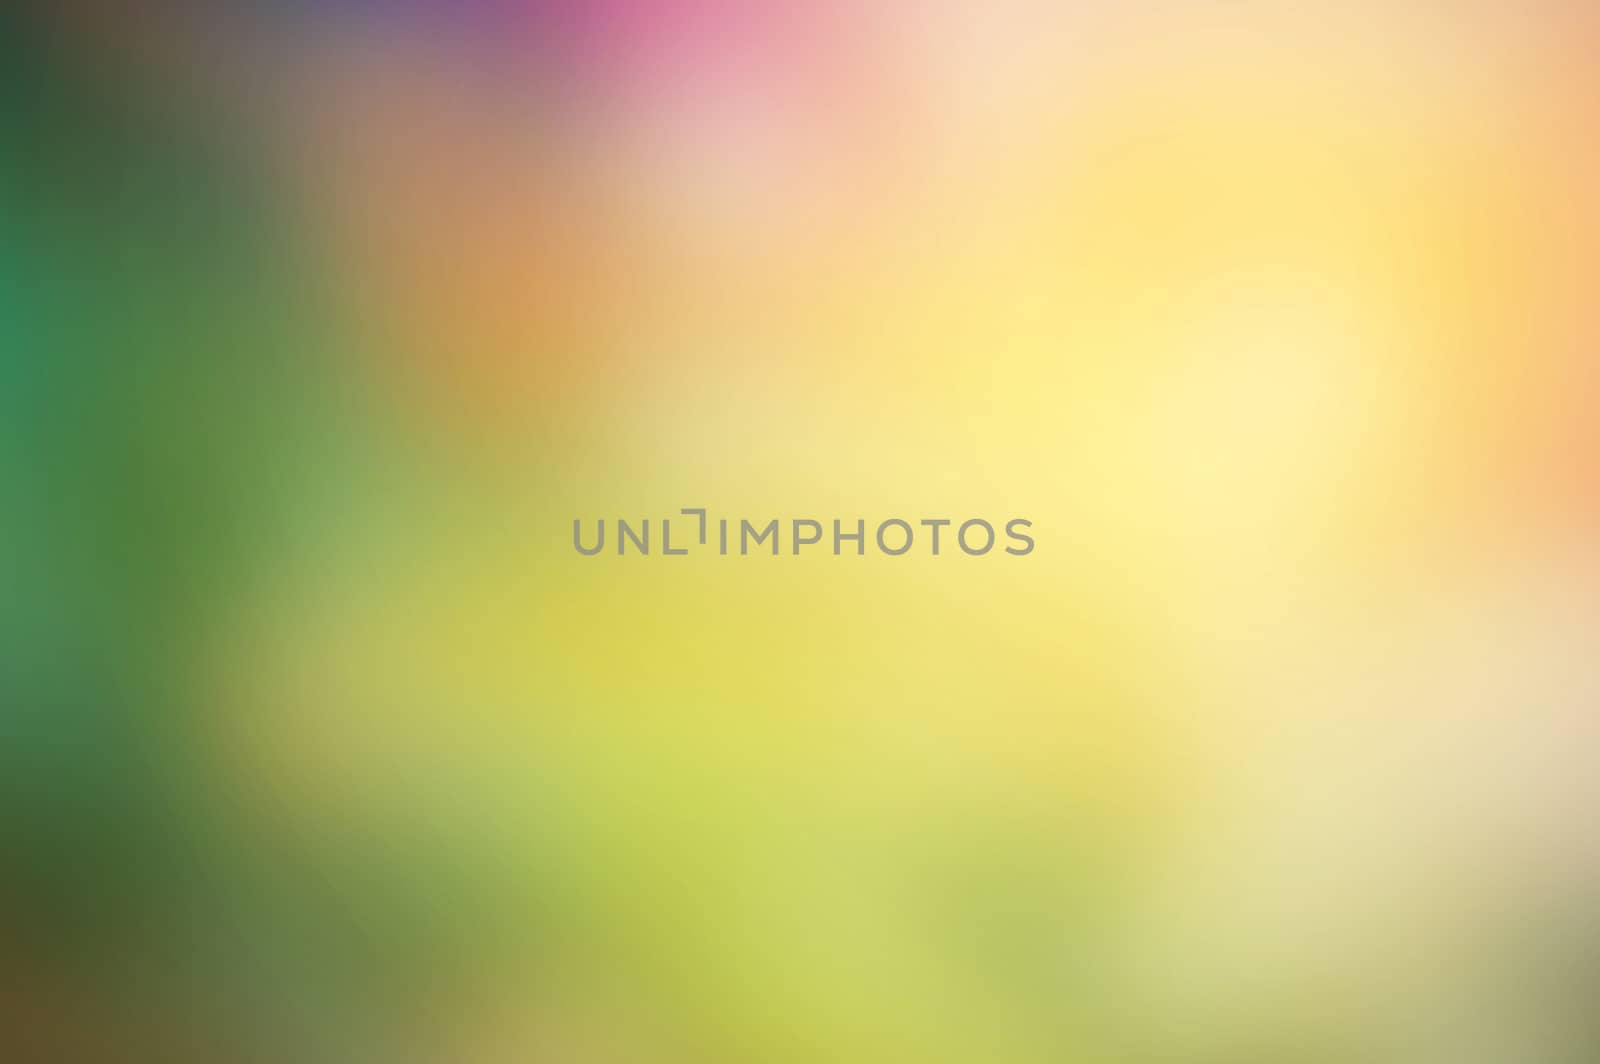 Colorful multi colored de-focused abstract photo by Nu1983